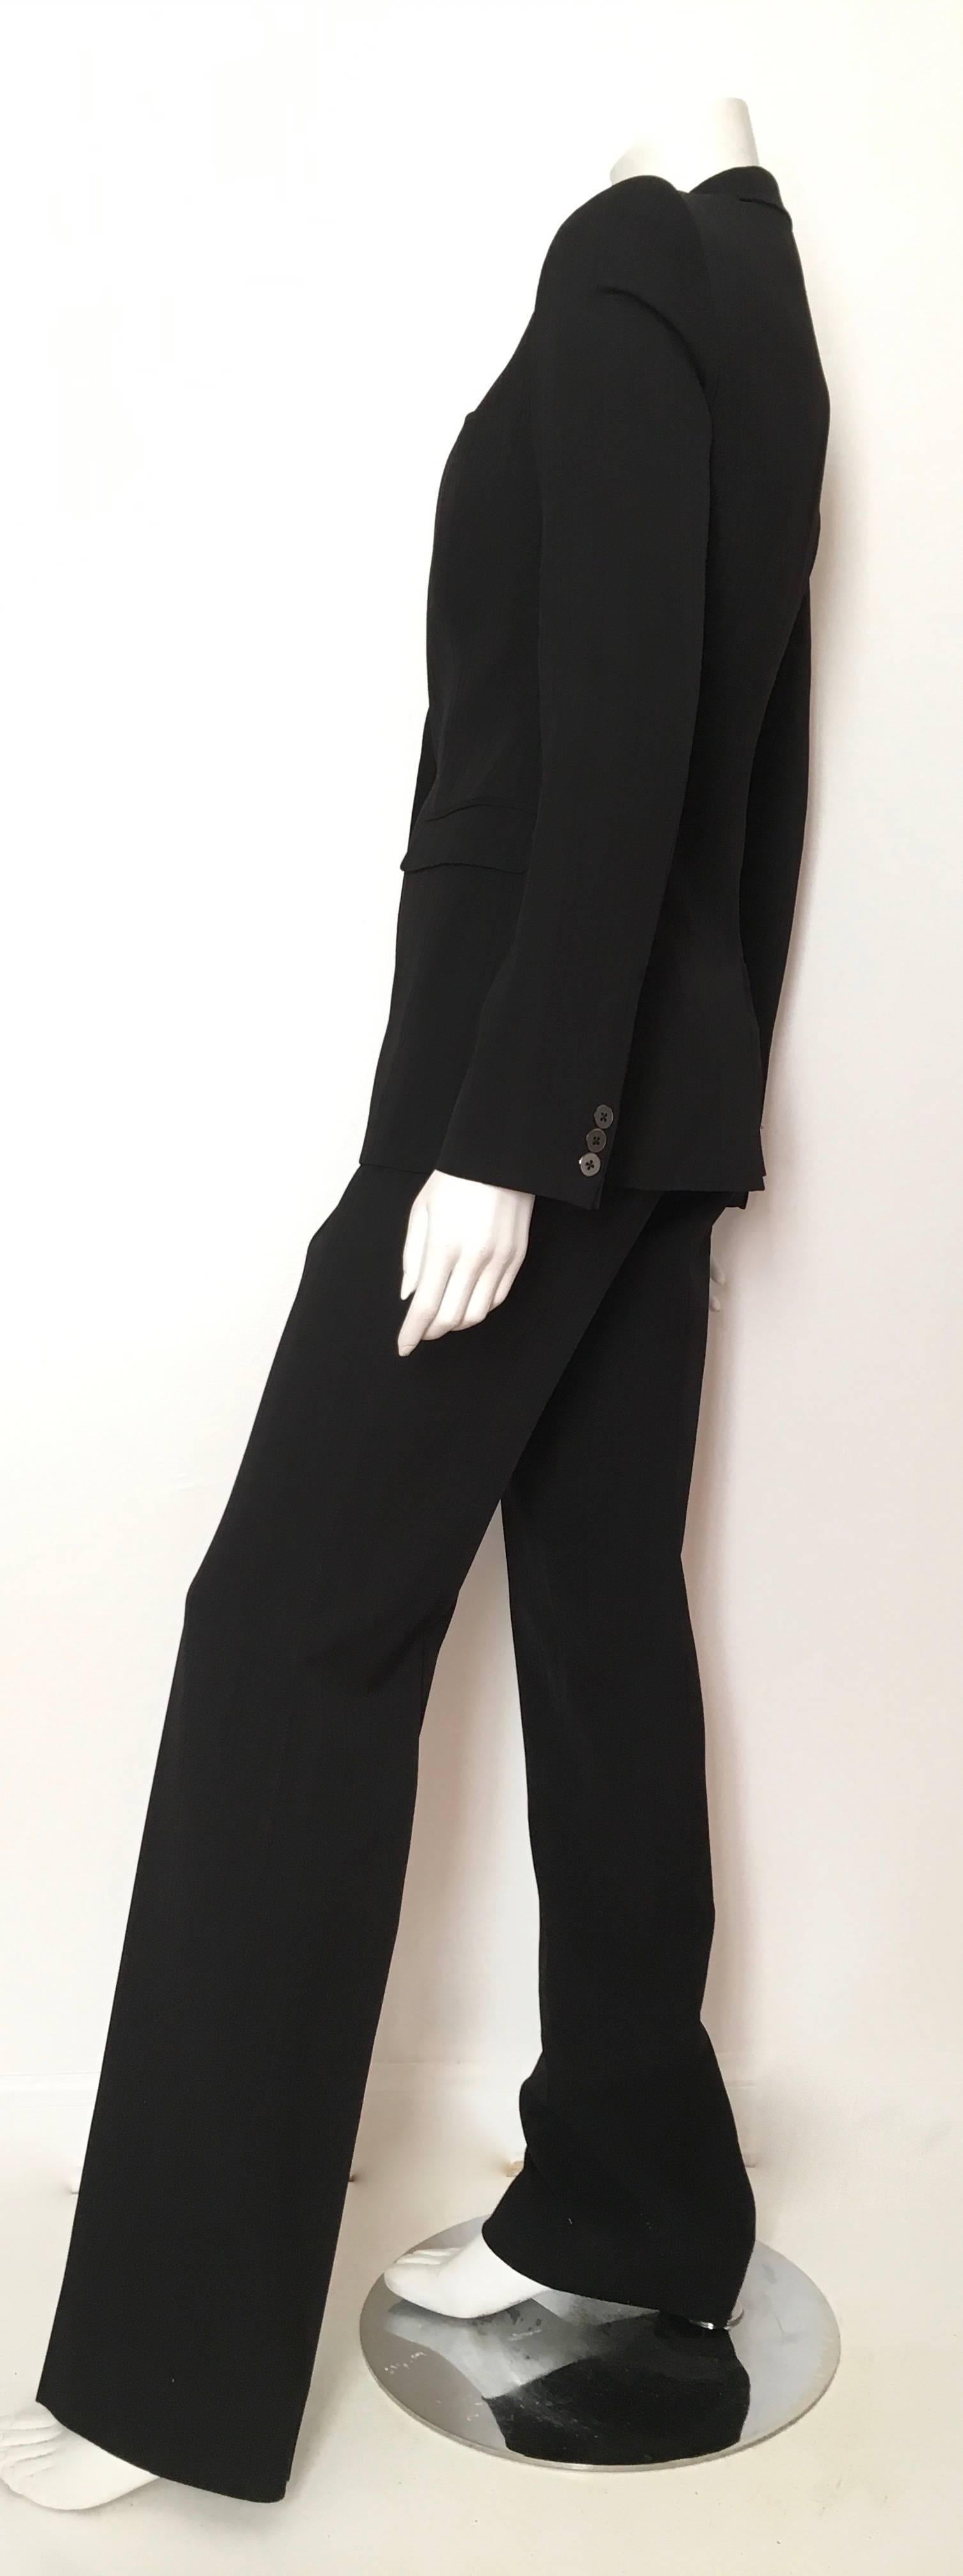 Women's or Men's Dolce & Gabbana Black Striped Wool Pant Suit with Cheetah lining Size 4. For Sale